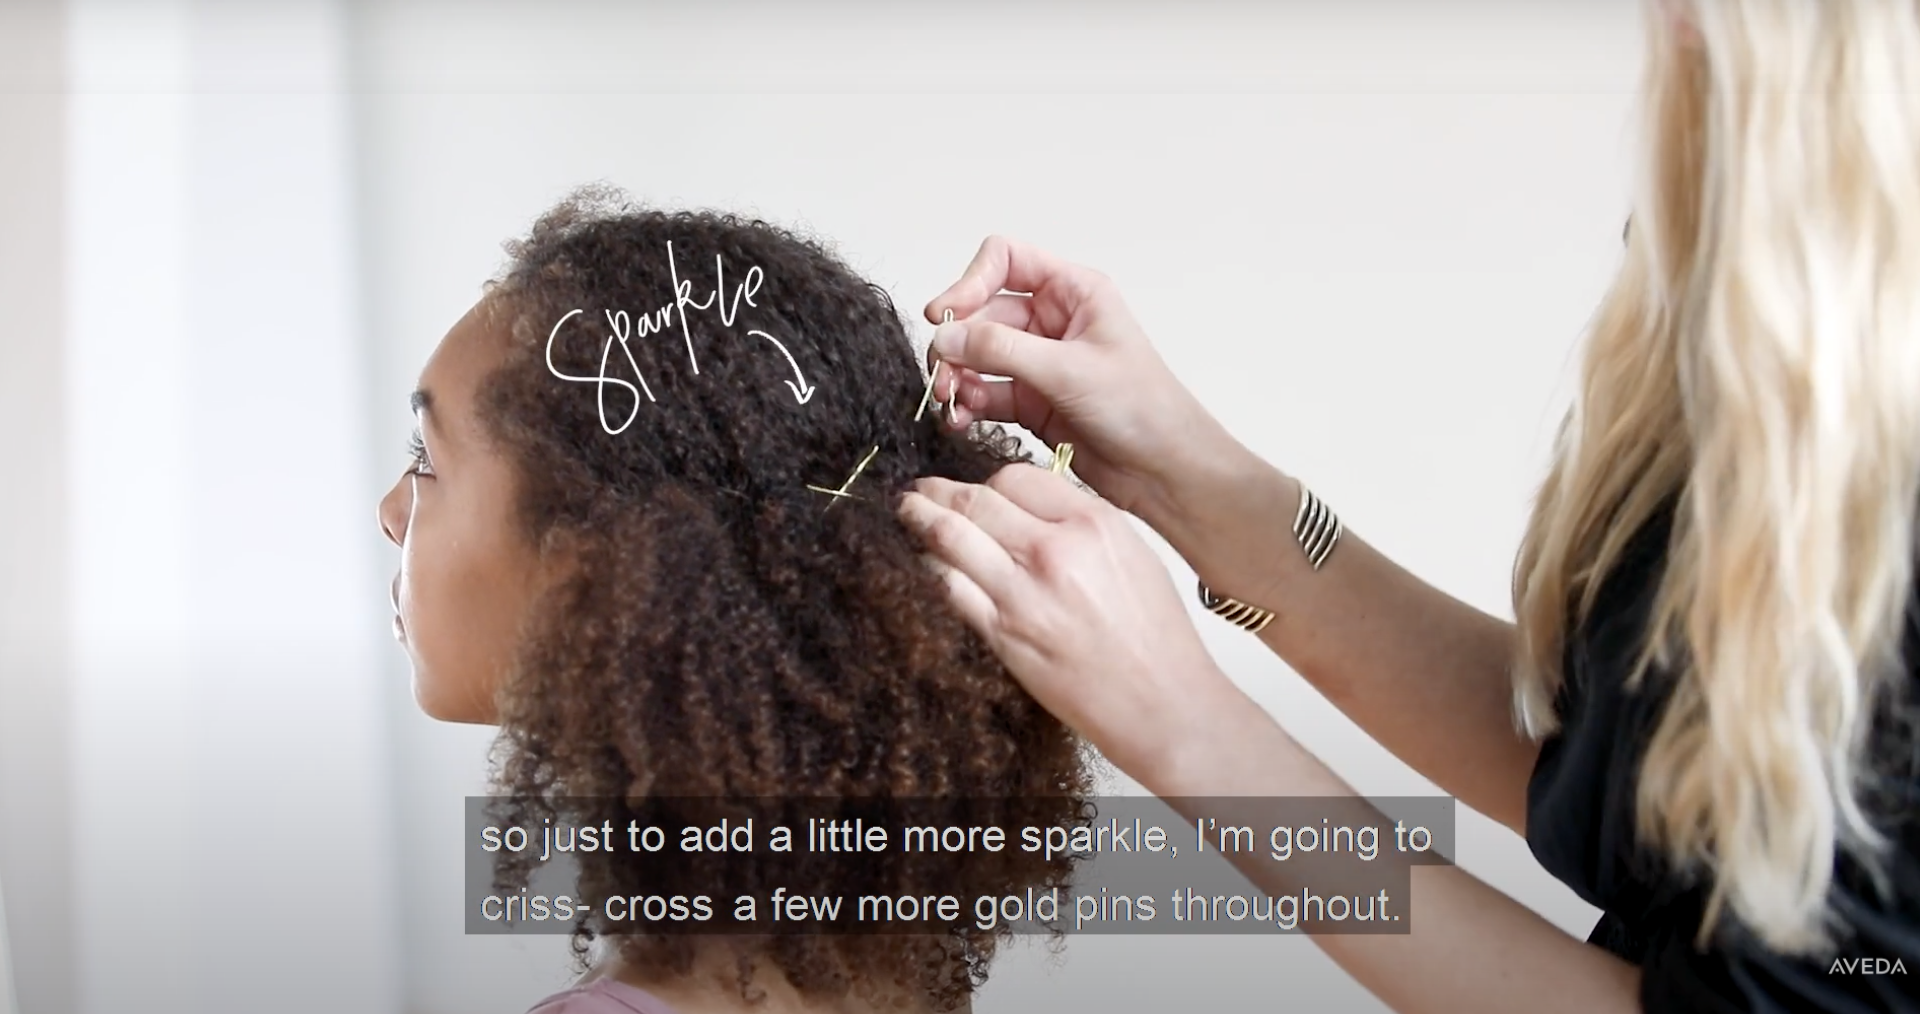 A hairdresser pinning bobbypins in this style on a model